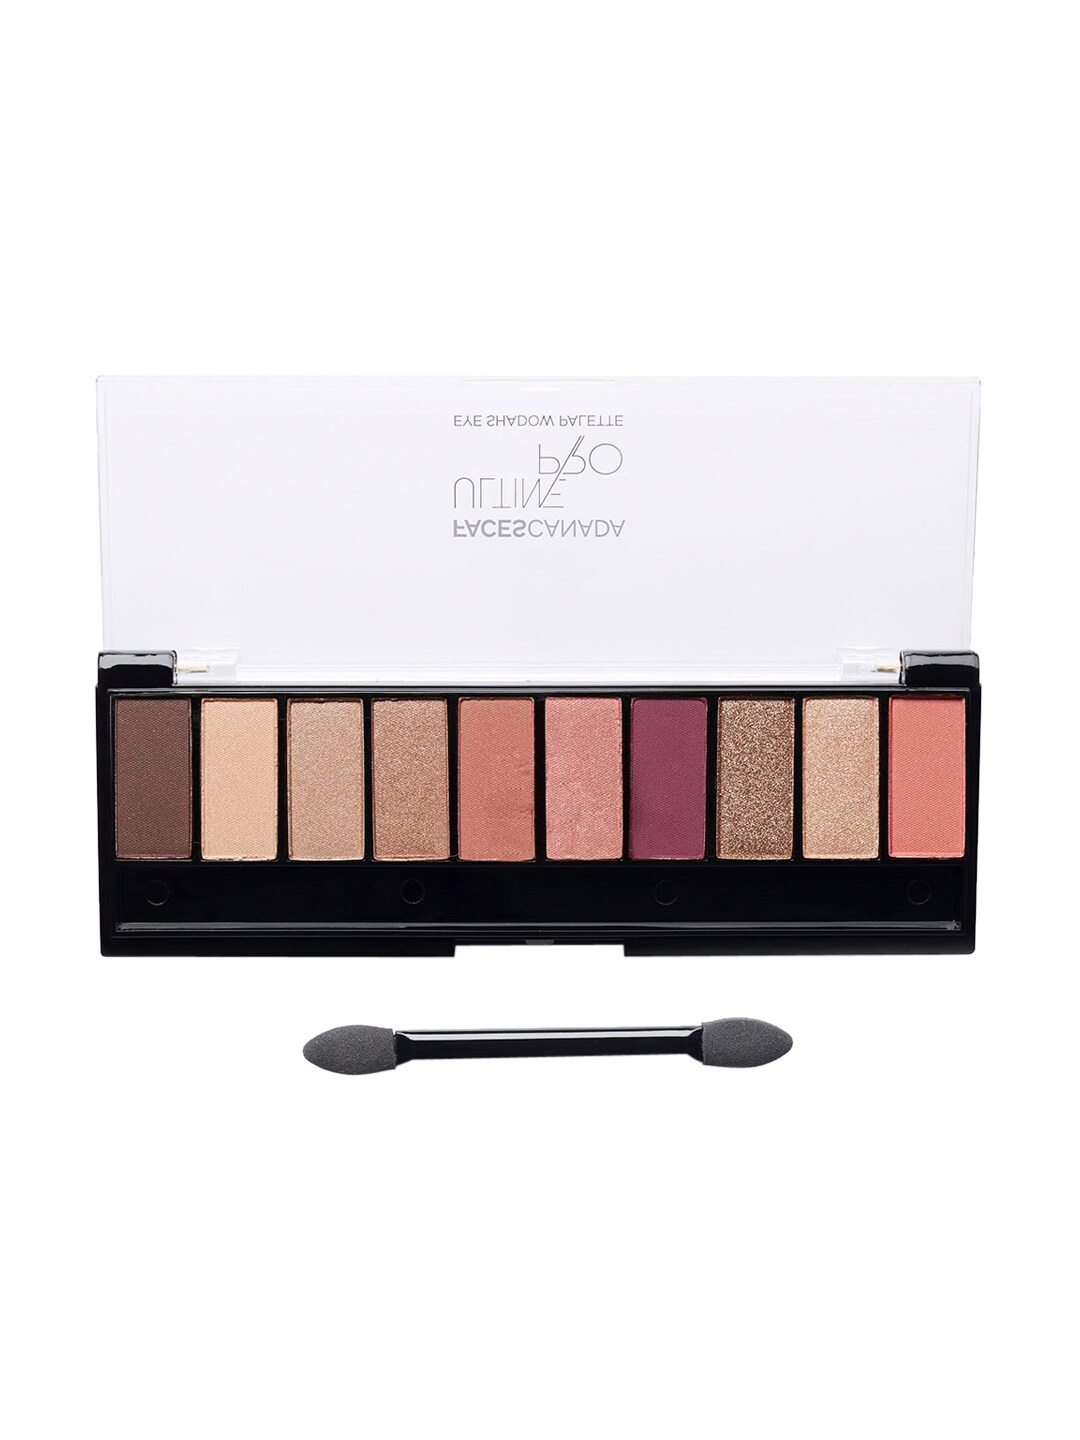 FACES CANADA Rose 02 Ultime Pro Eyeshadow Pallete 10 g Price in India